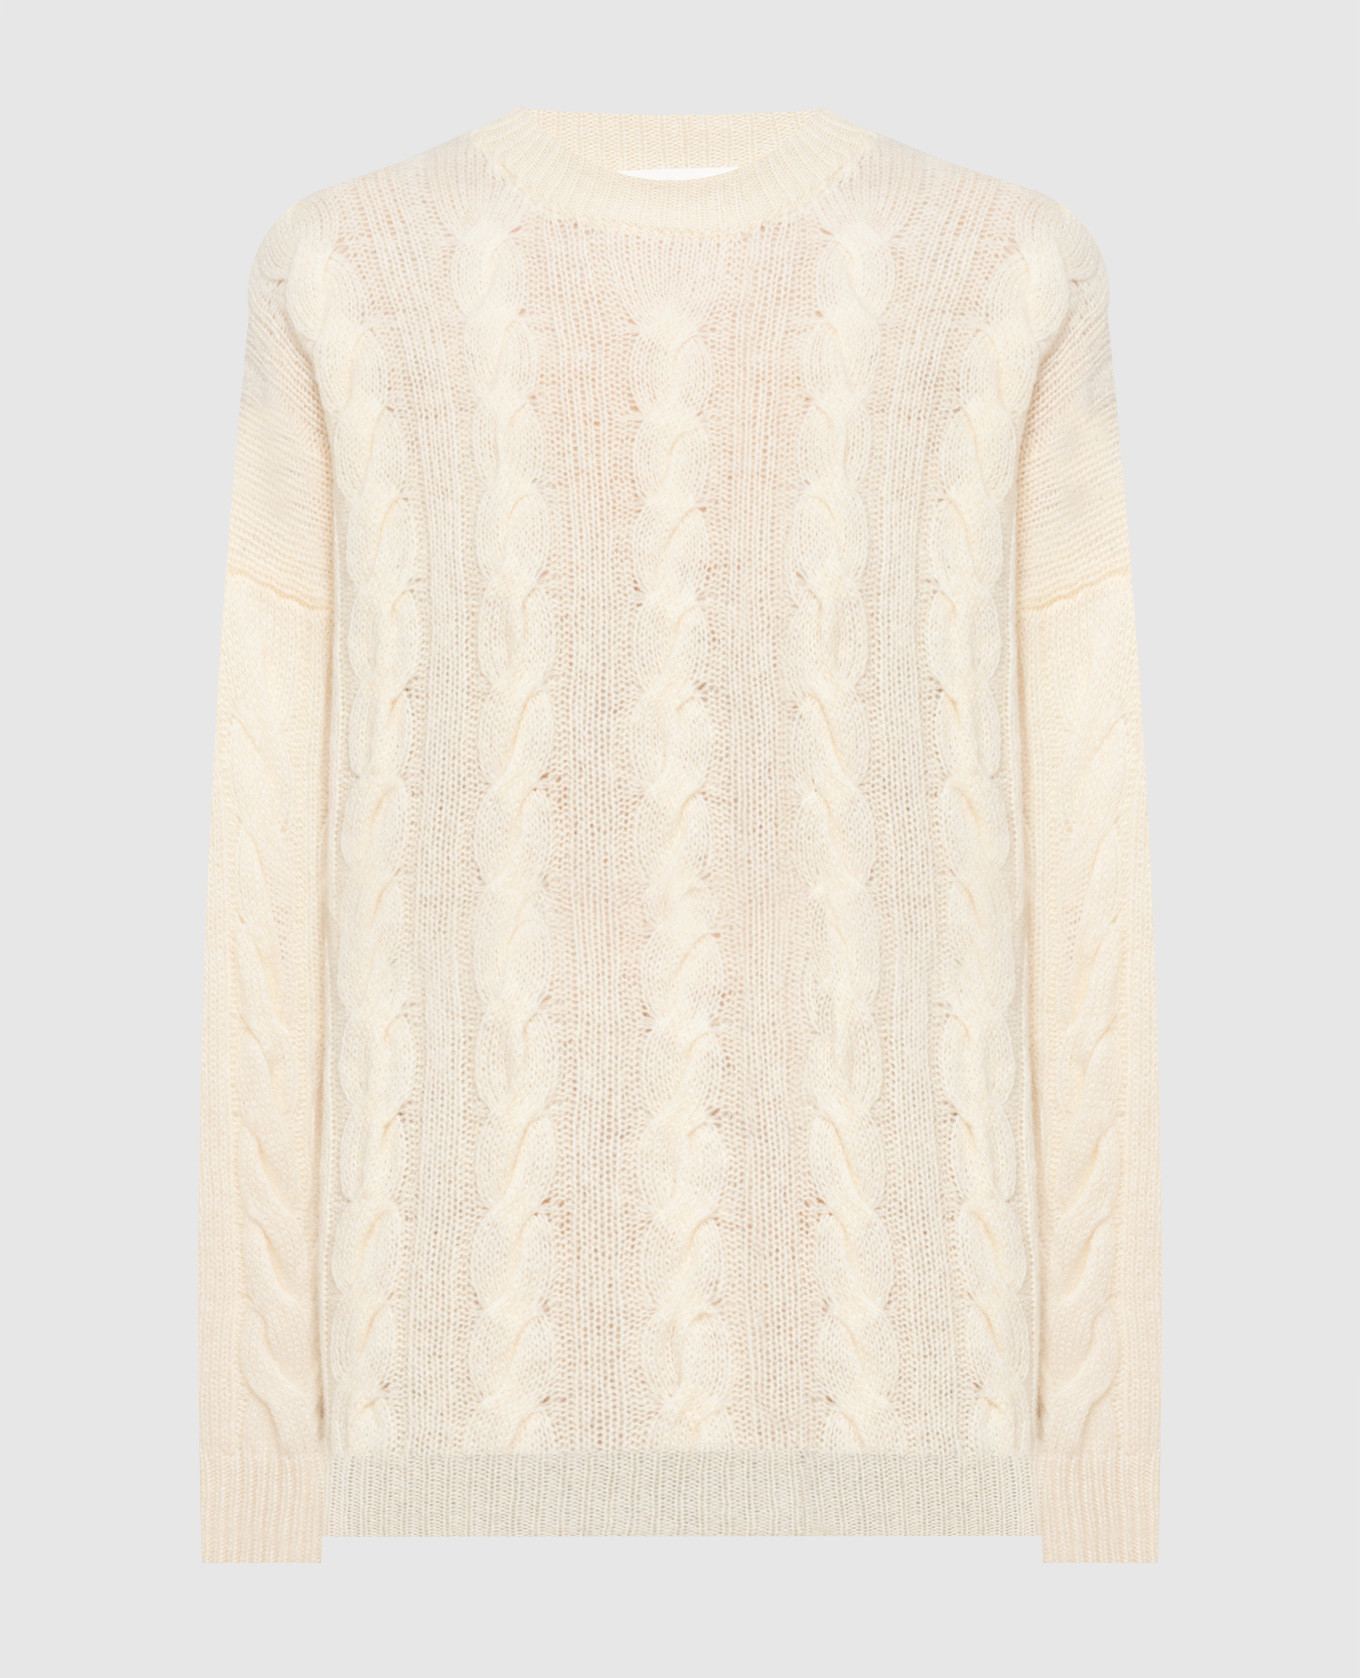 Beige sweater made of wool and cashmere in a textured pattern